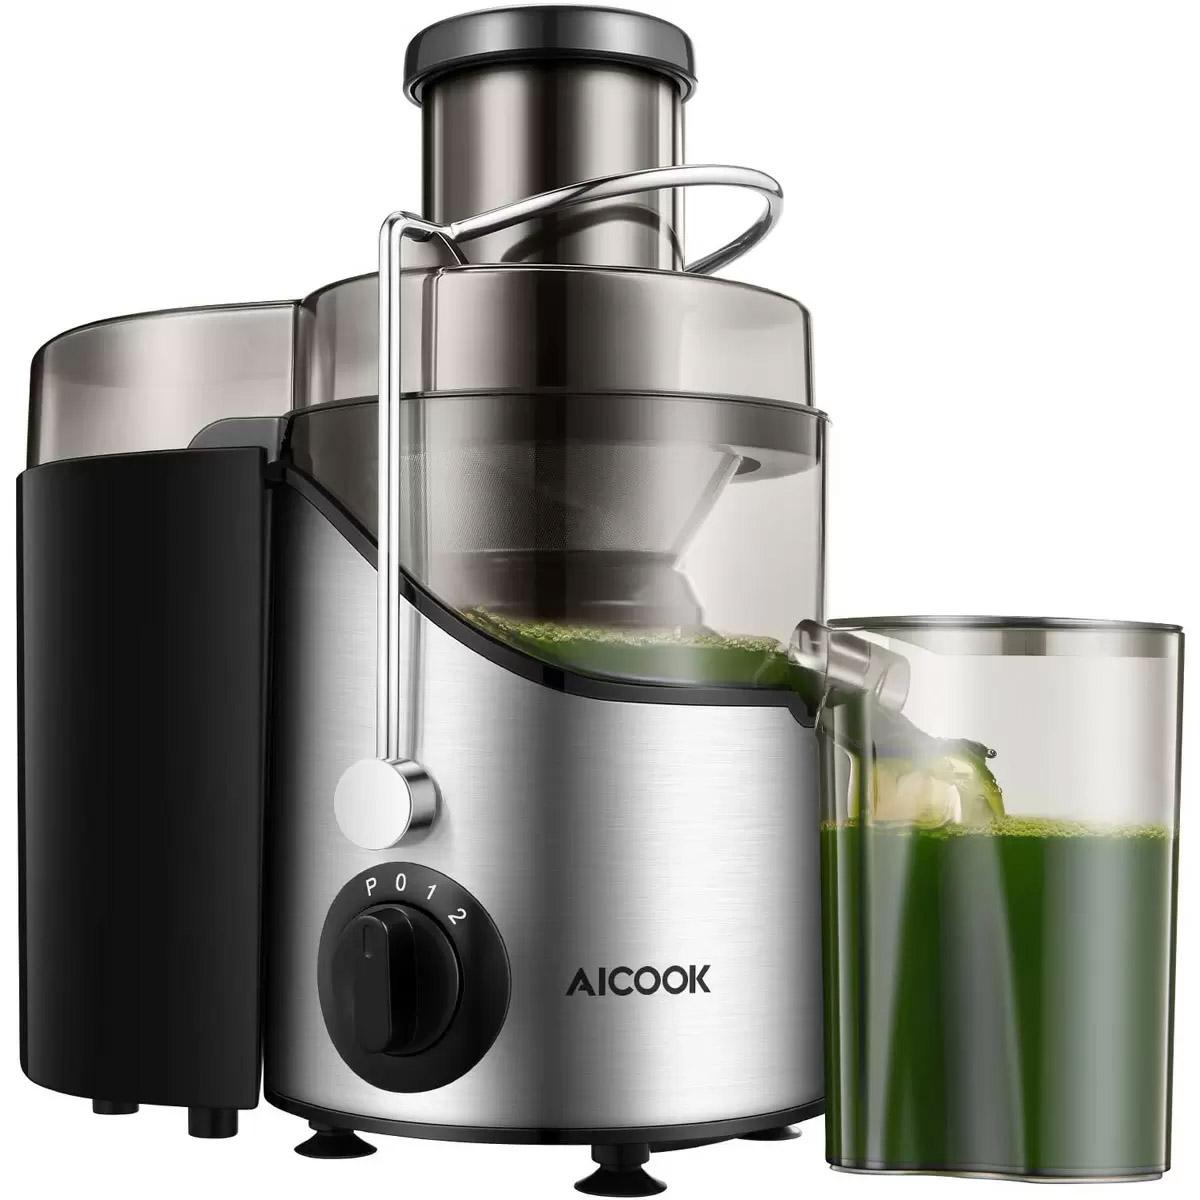 Aicook Juicer Extractor Machine for $36.79 Shipped